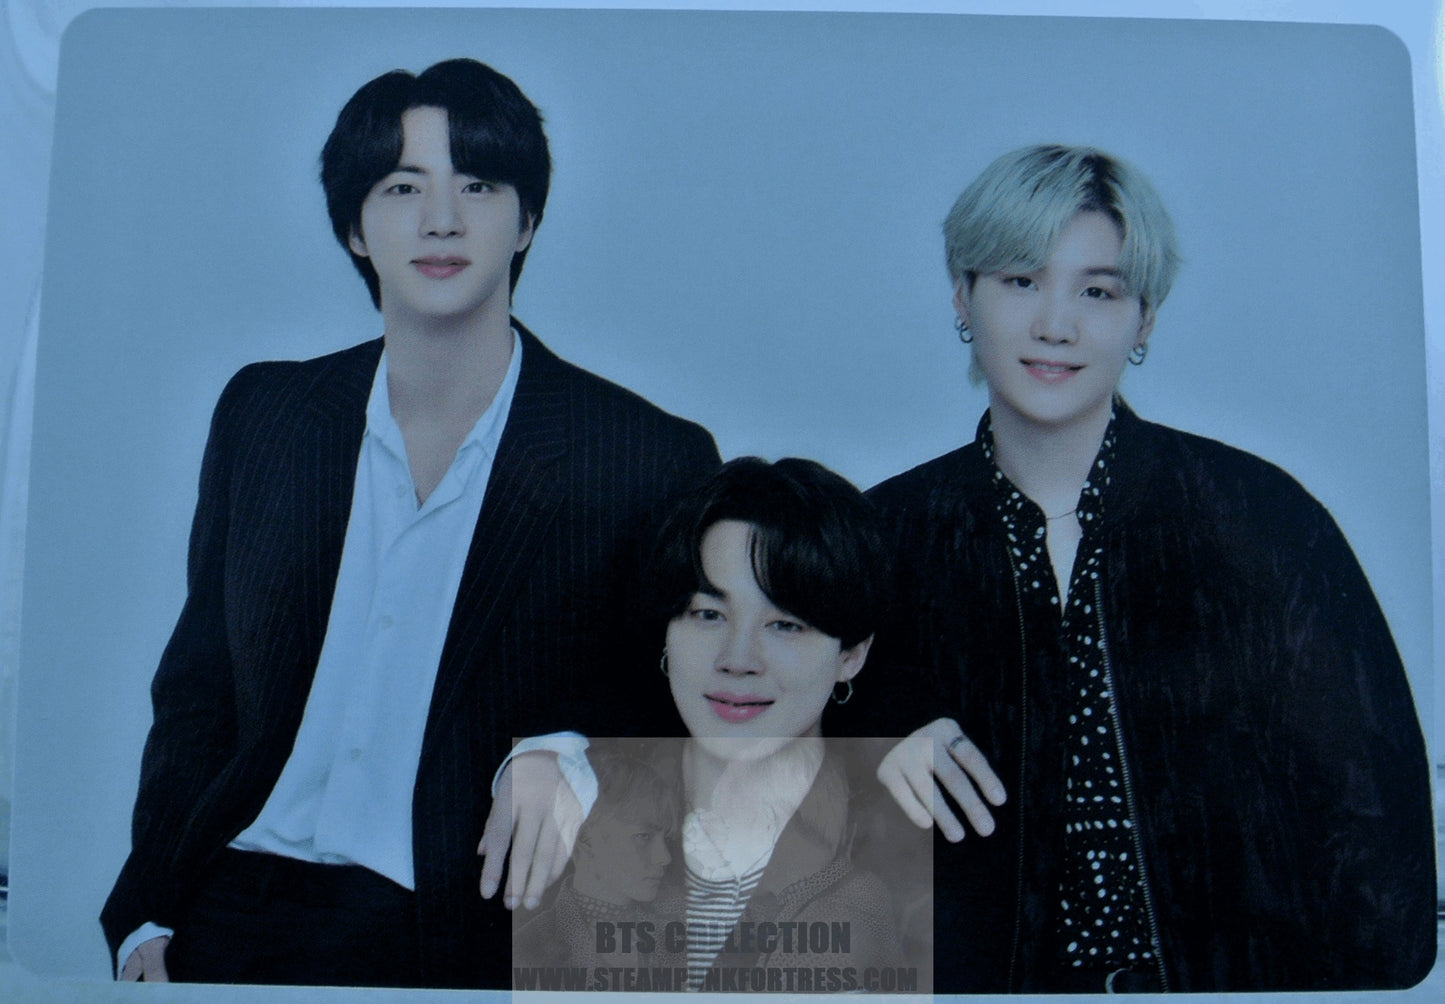 BTS PERMISSION TO DANCE ON STAGE PTD JIN KIM SEOKJIN JIMIN PARK SUGA MIN YOONGI 2021 PHOTOCARD PHOTO CARD #4 OF 4 NEW OFFICIAL GROUP UNIT MERCHANDISE